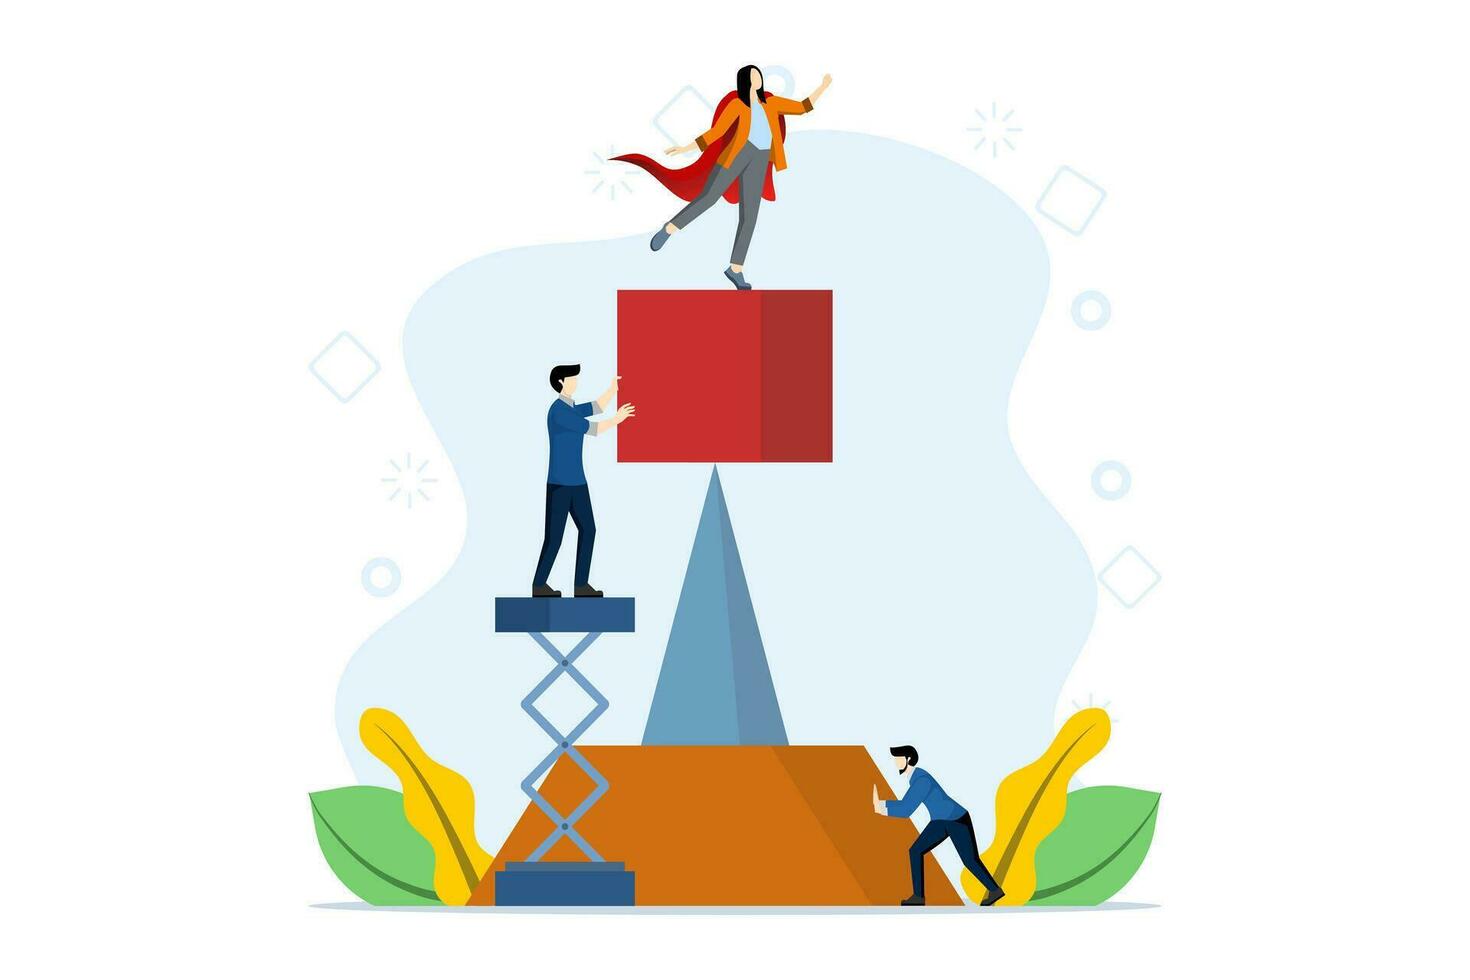 Teamwork Concept Creative People Working Together to Achieve Goals, Pyramid Building a Successful Dream Team, Female Leader in Red Coat Standing on Top, Business Development Teamwork. vector